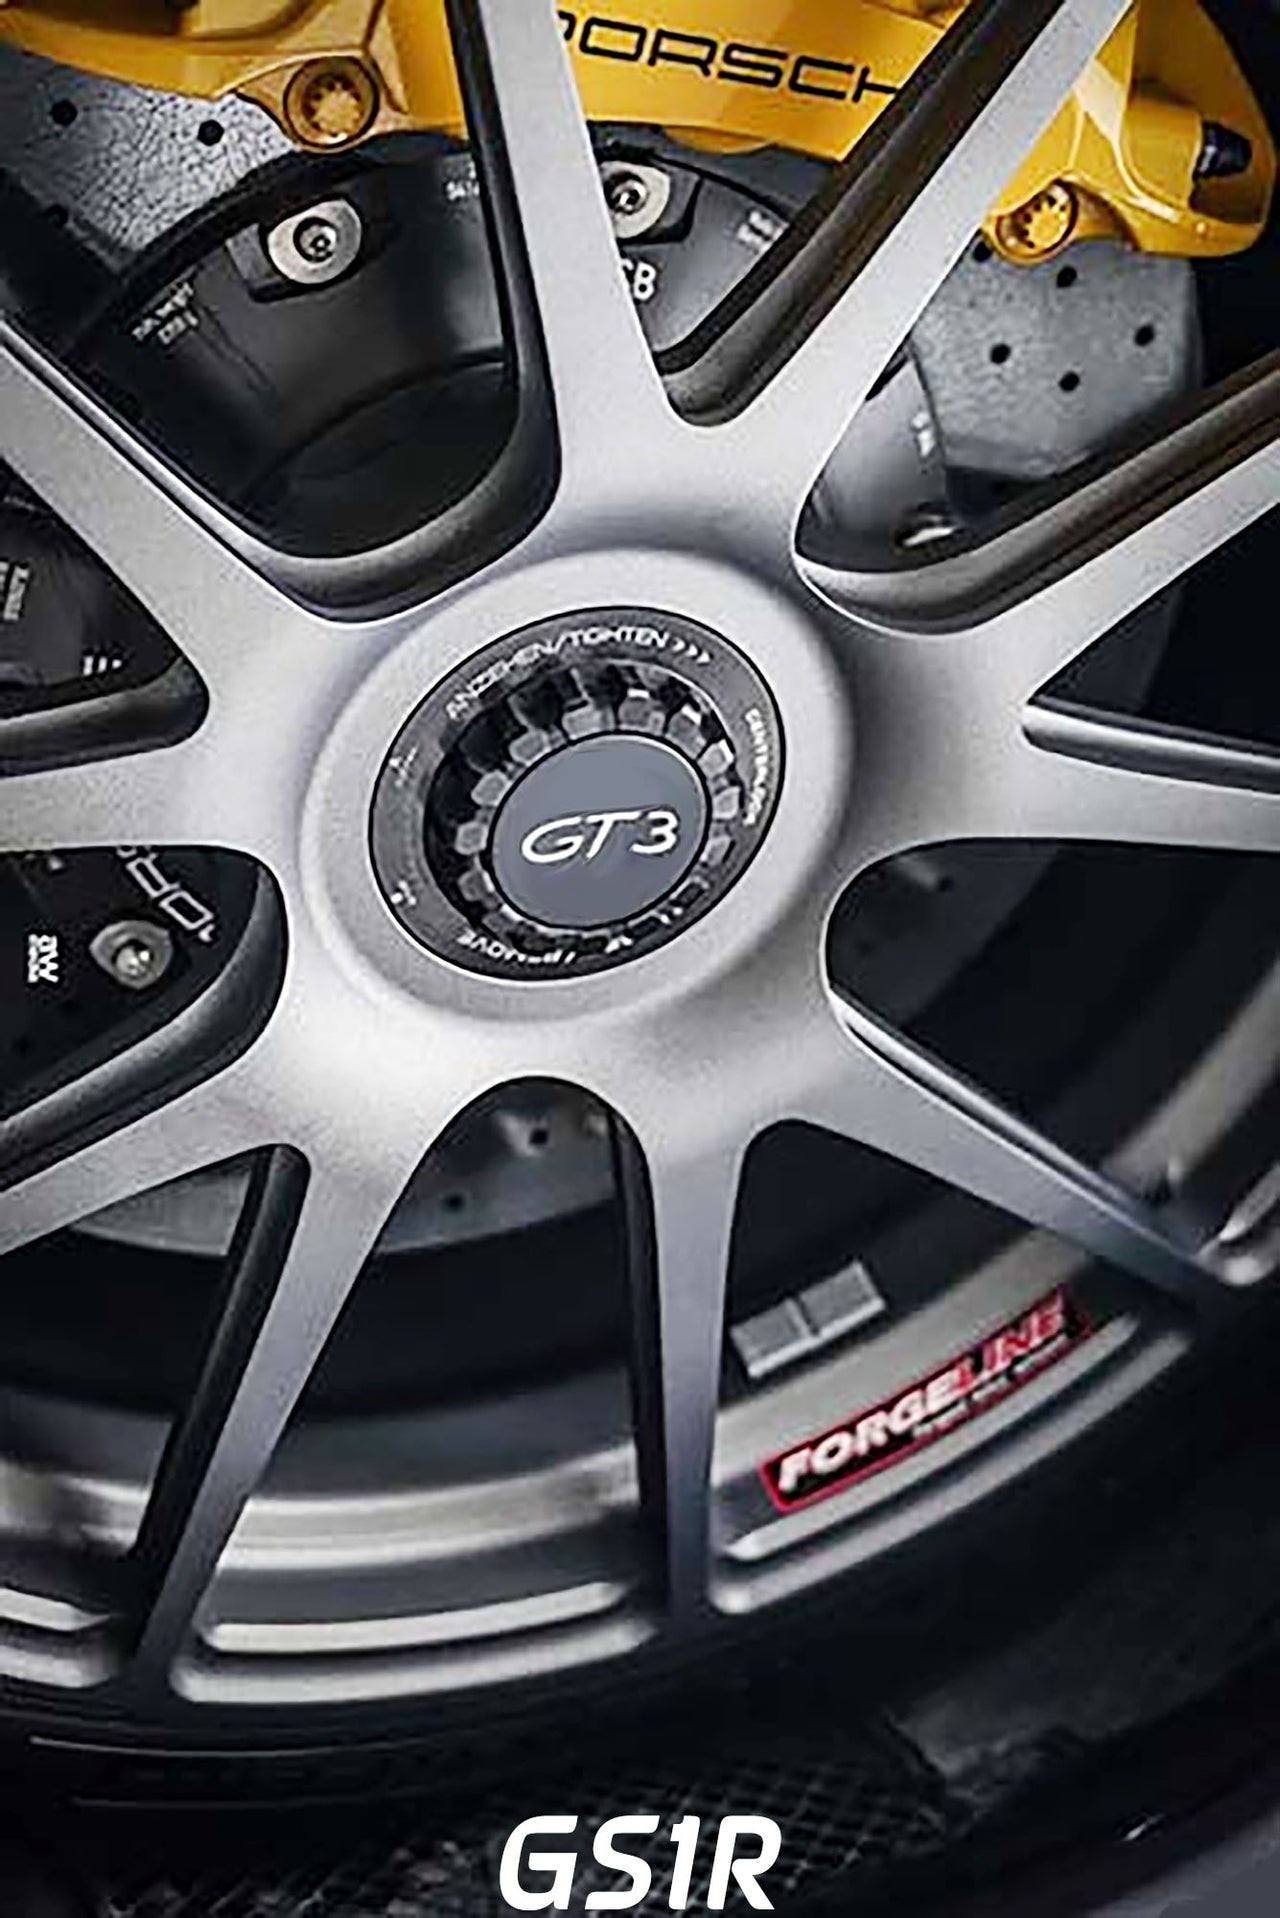 Forgeline Porsche center lock GS1R has brake clearance for big brake kits and racing brakes